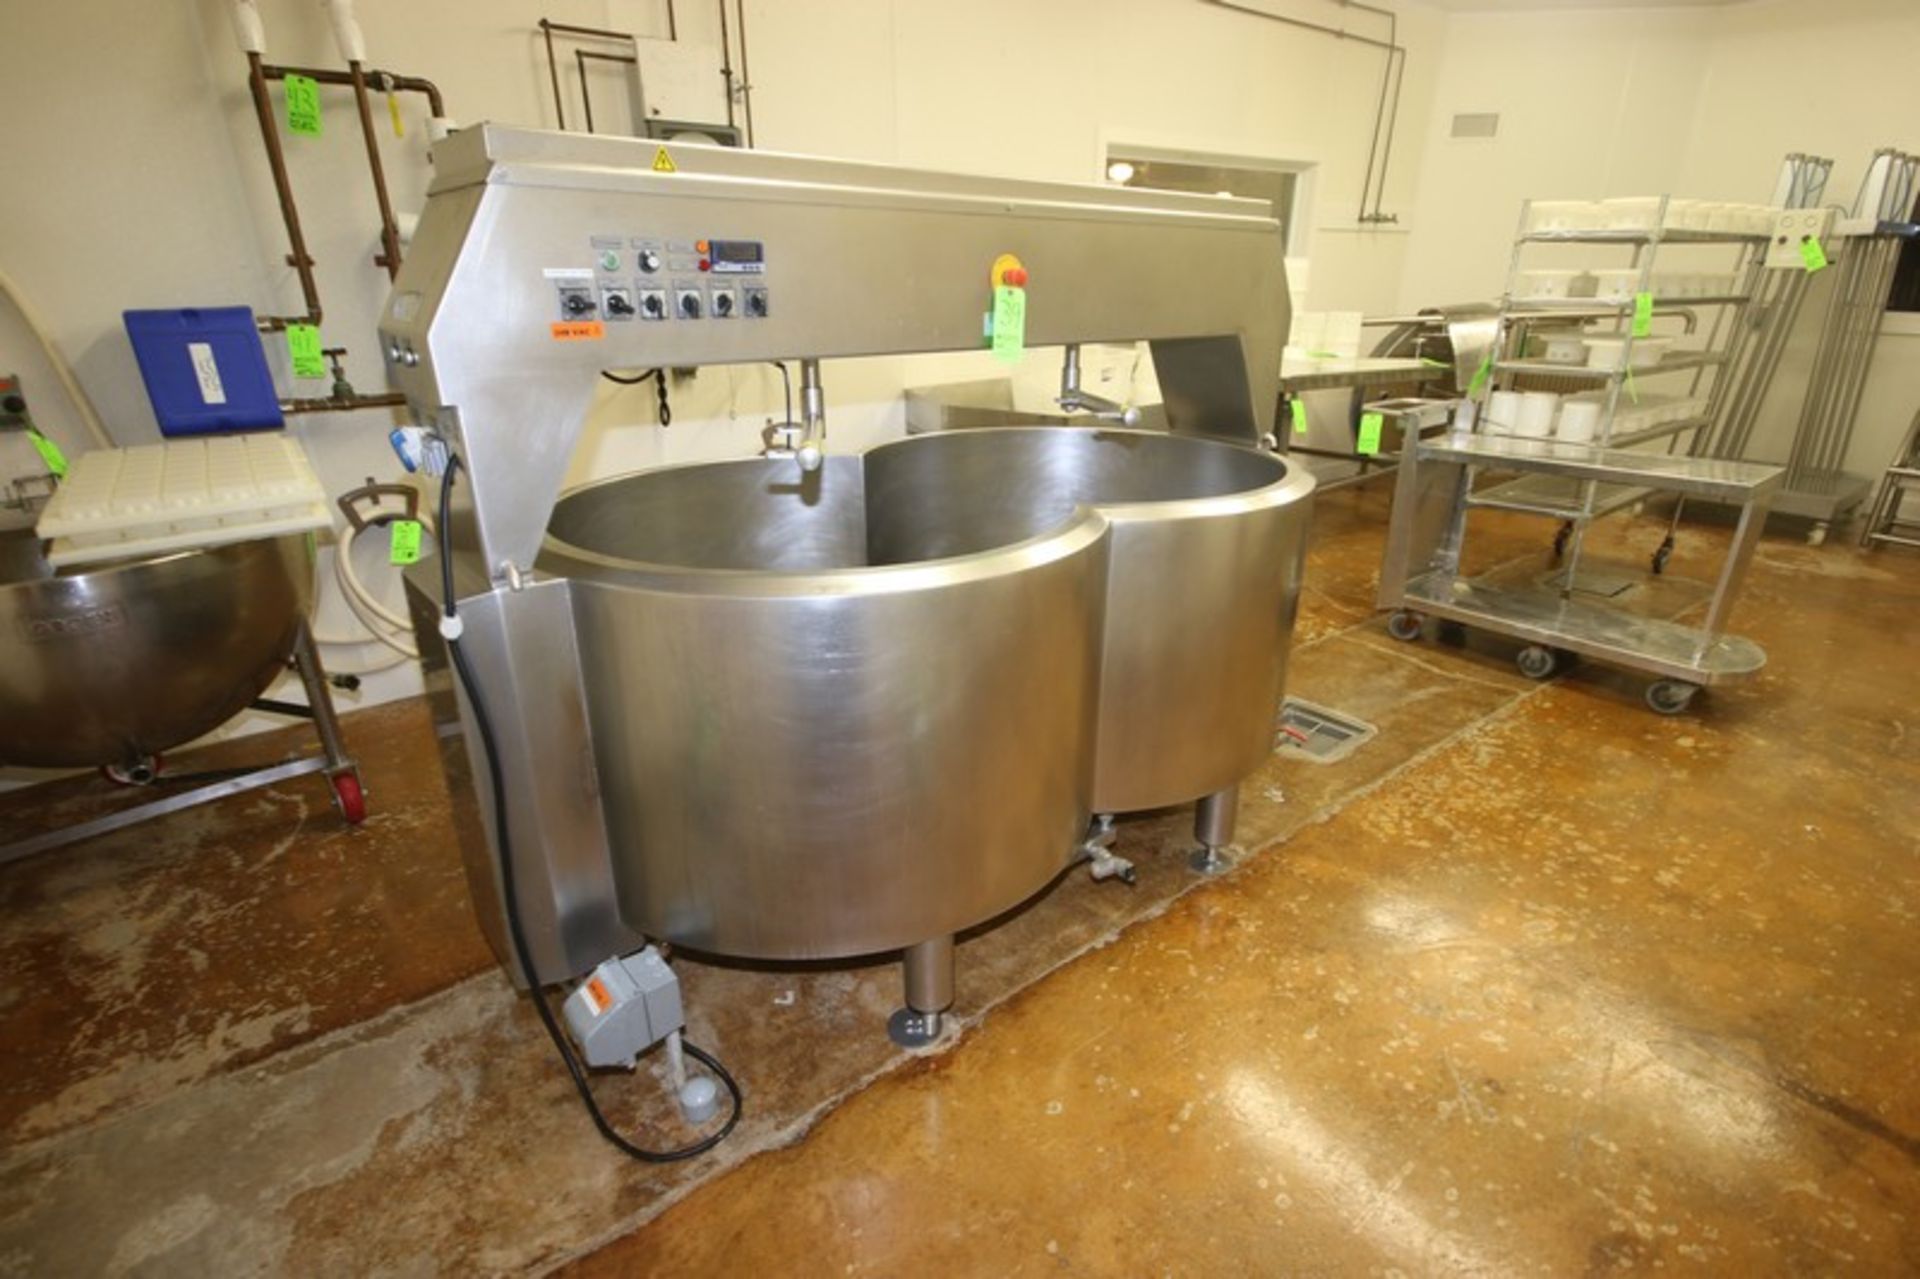 CVR 290 Gal. Double OO Cheesevat, S/N 0708019706, Includes Pump, Overall Dims.: Aprox. 8' L x 53"